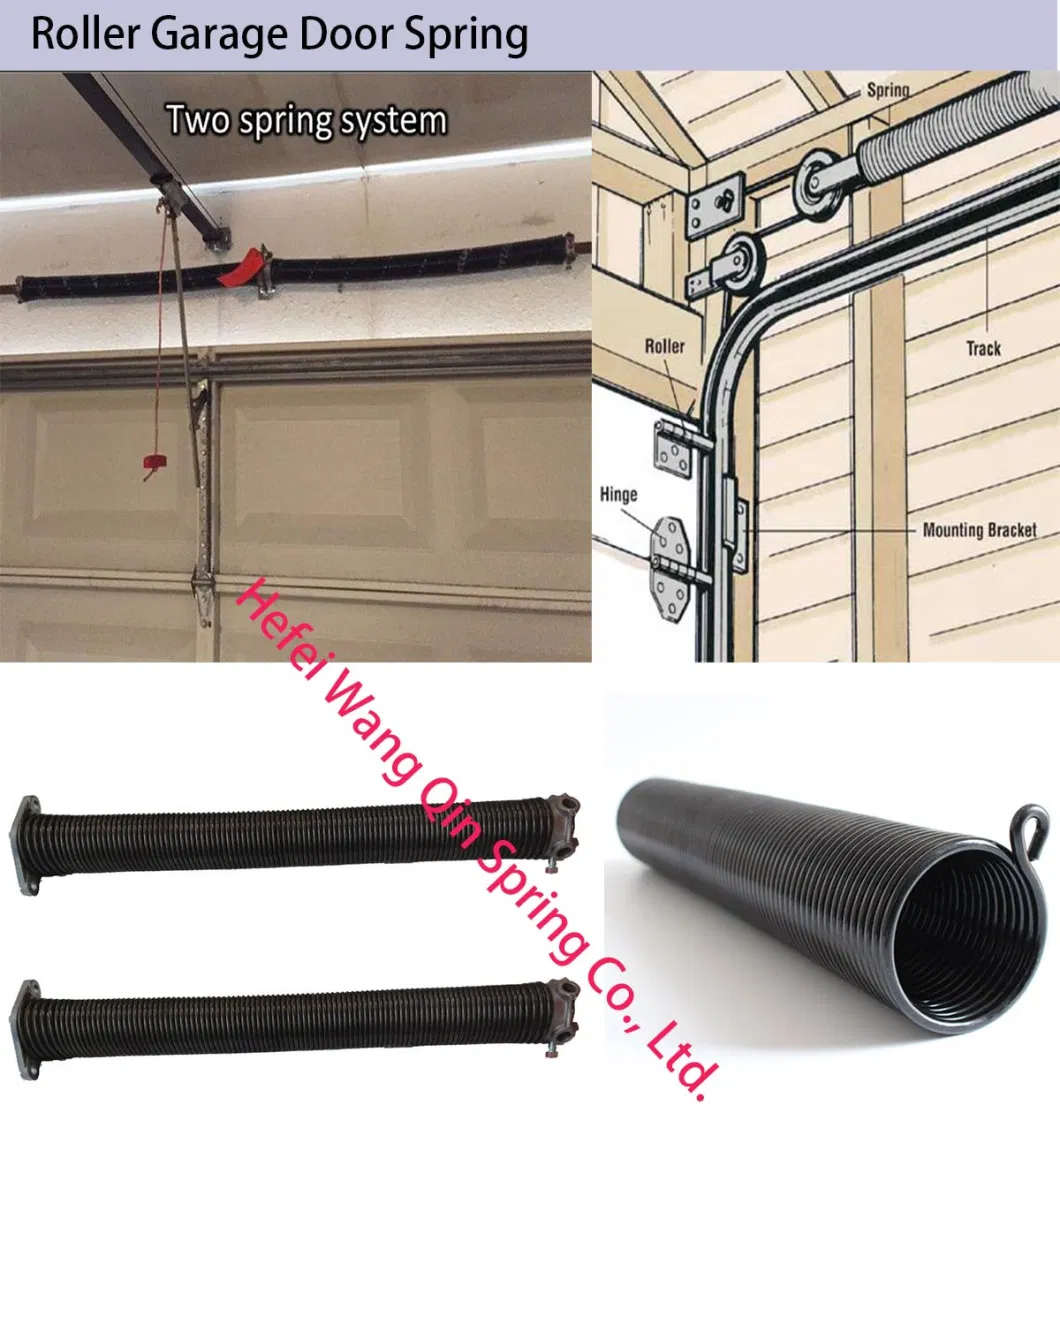 82b Overhead Garage Door 6 Inches Torsion Coil Spring with Cones